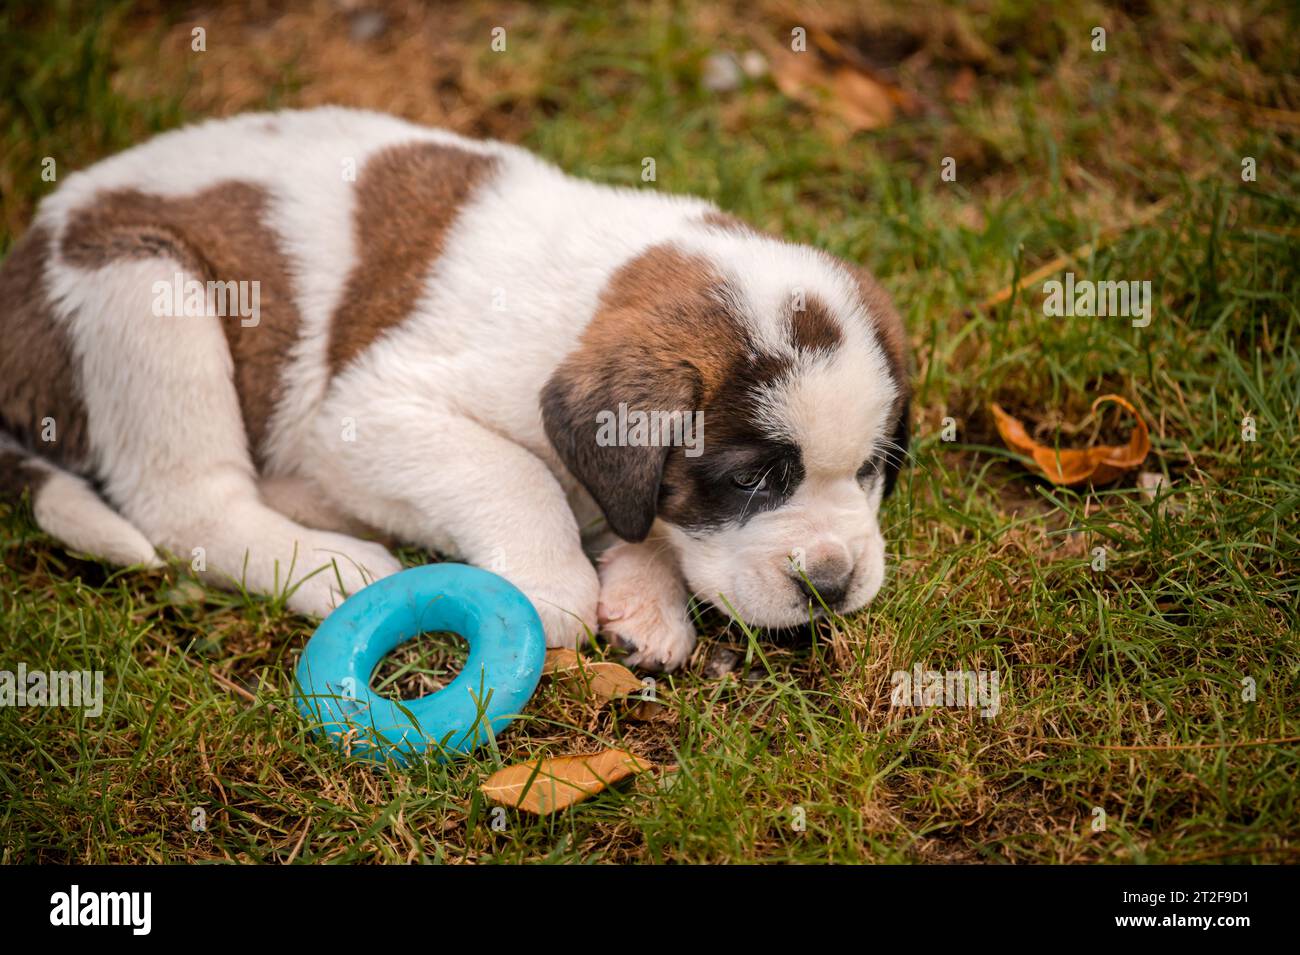 Portrait of a dog. One white and brown Saint Bernard puppy playing toy ring on meadow. St. Bernard. Alpine Spaniel in Switzerland. Stock Photo